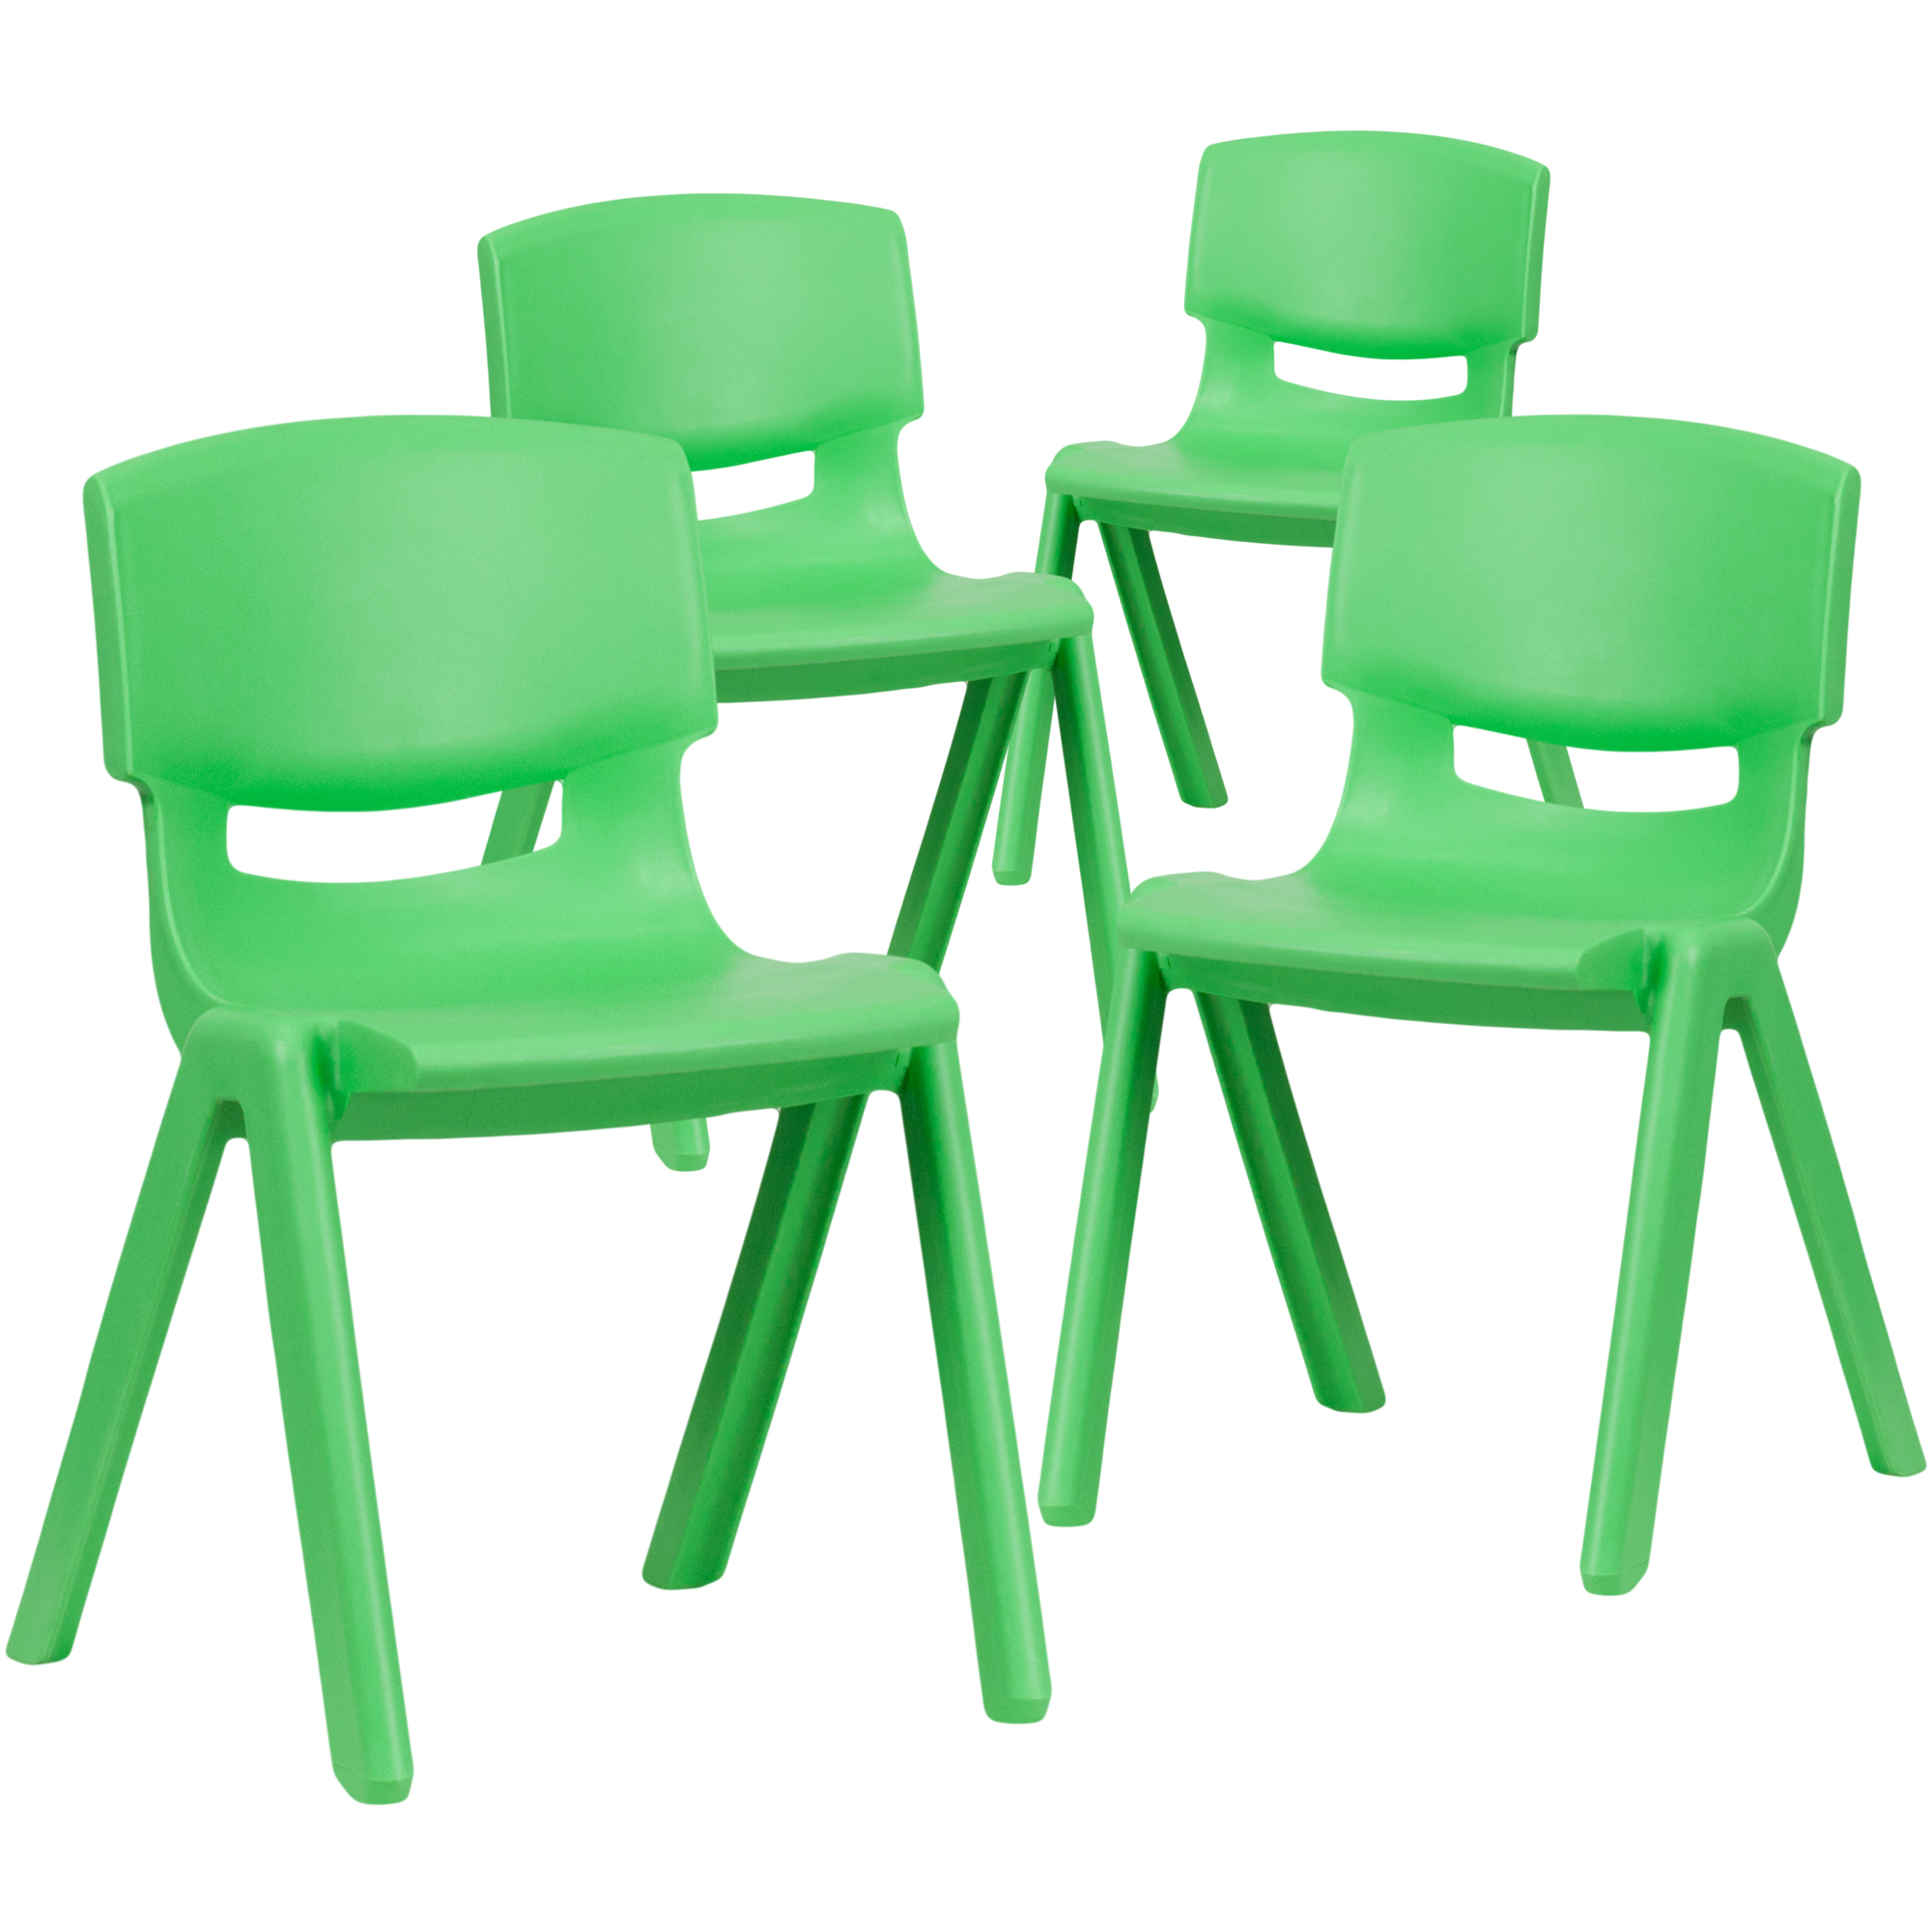 Flash Furniture, 4 Pk Green Plastic Stack School Chair-13.25Inch H Seat, Primary Color Green, Included (qty.) 4, Model 4YUYCX4004GREEN